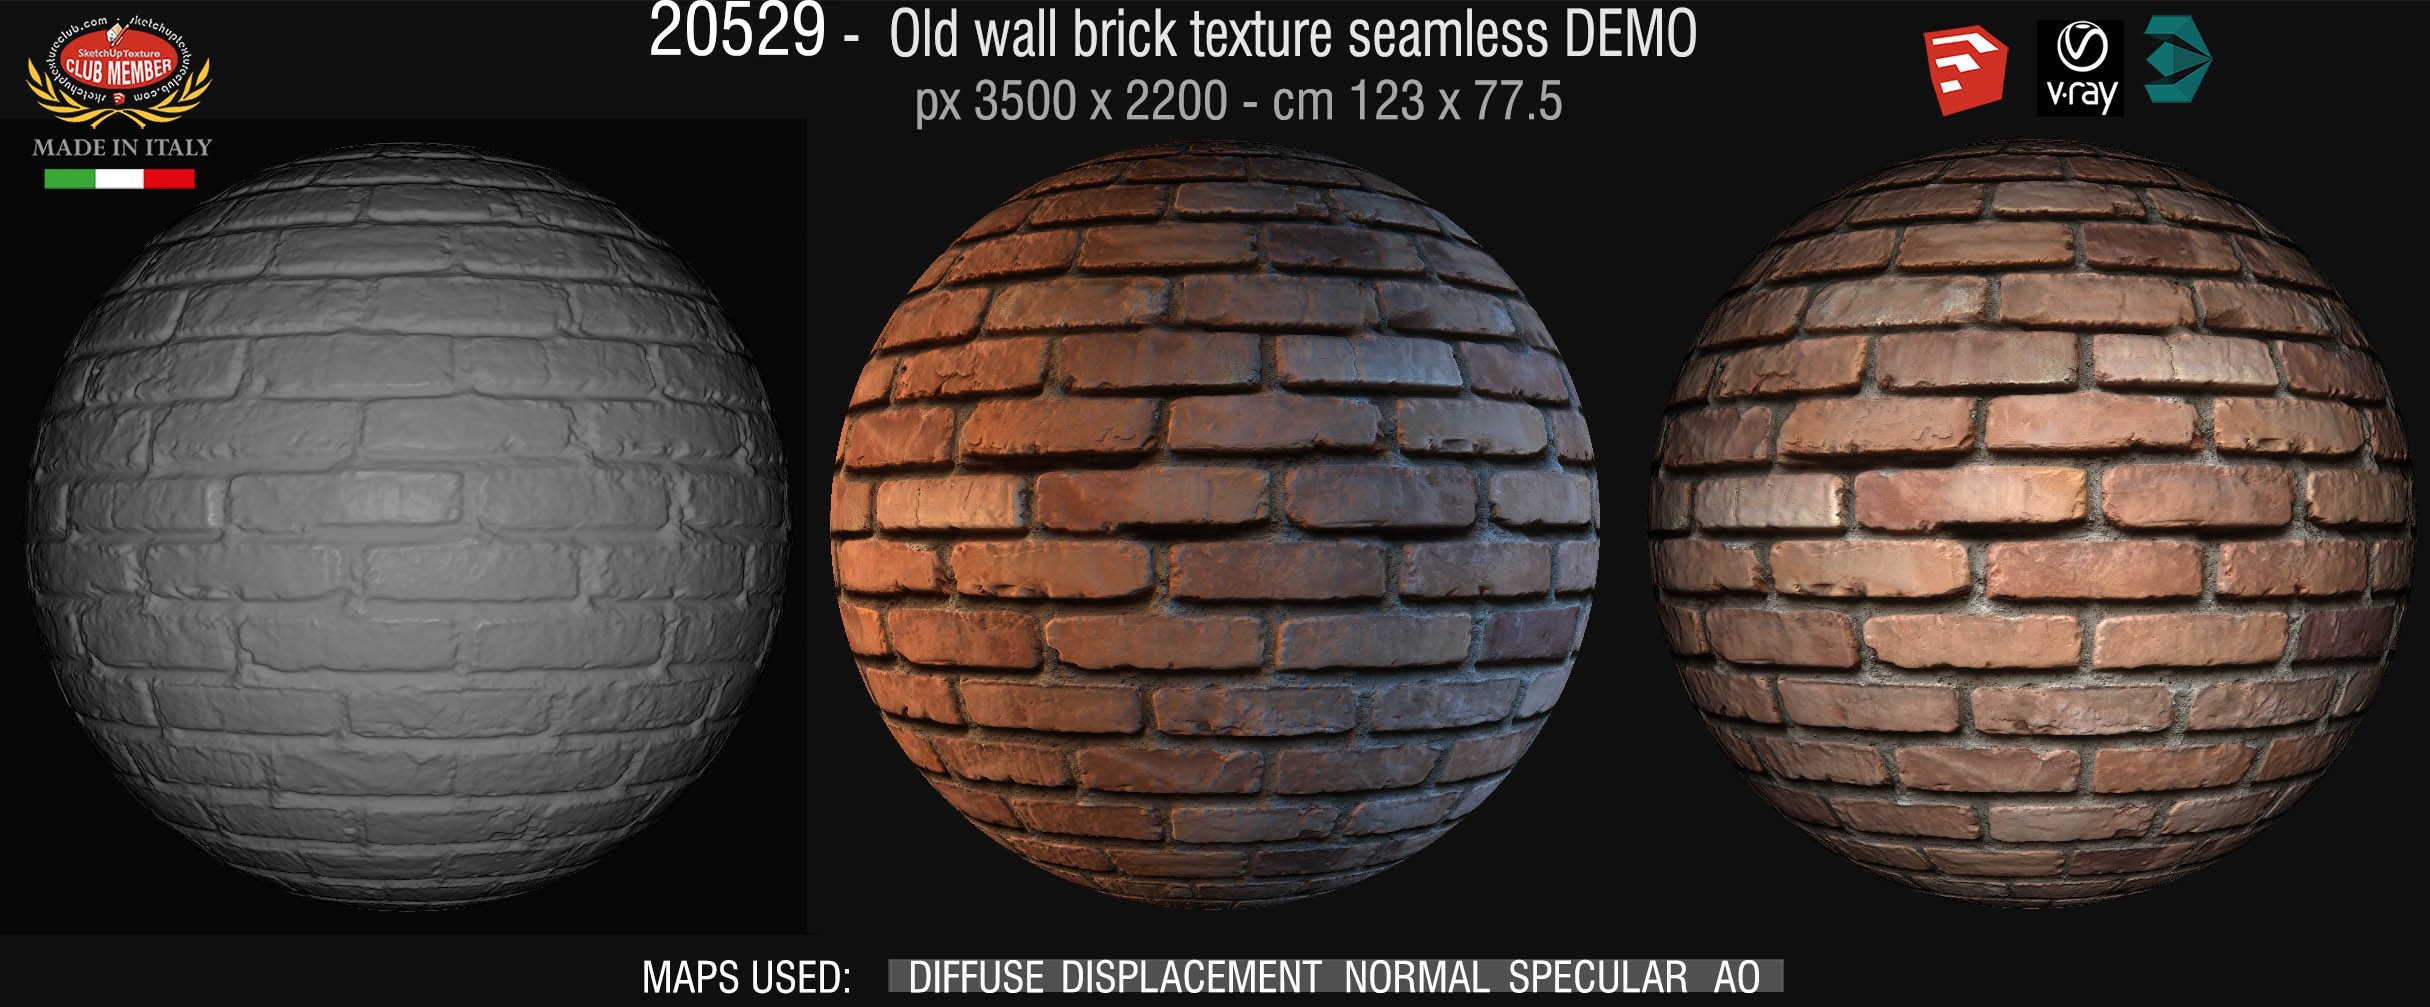 20529 old wall brick texture + maps DEMO